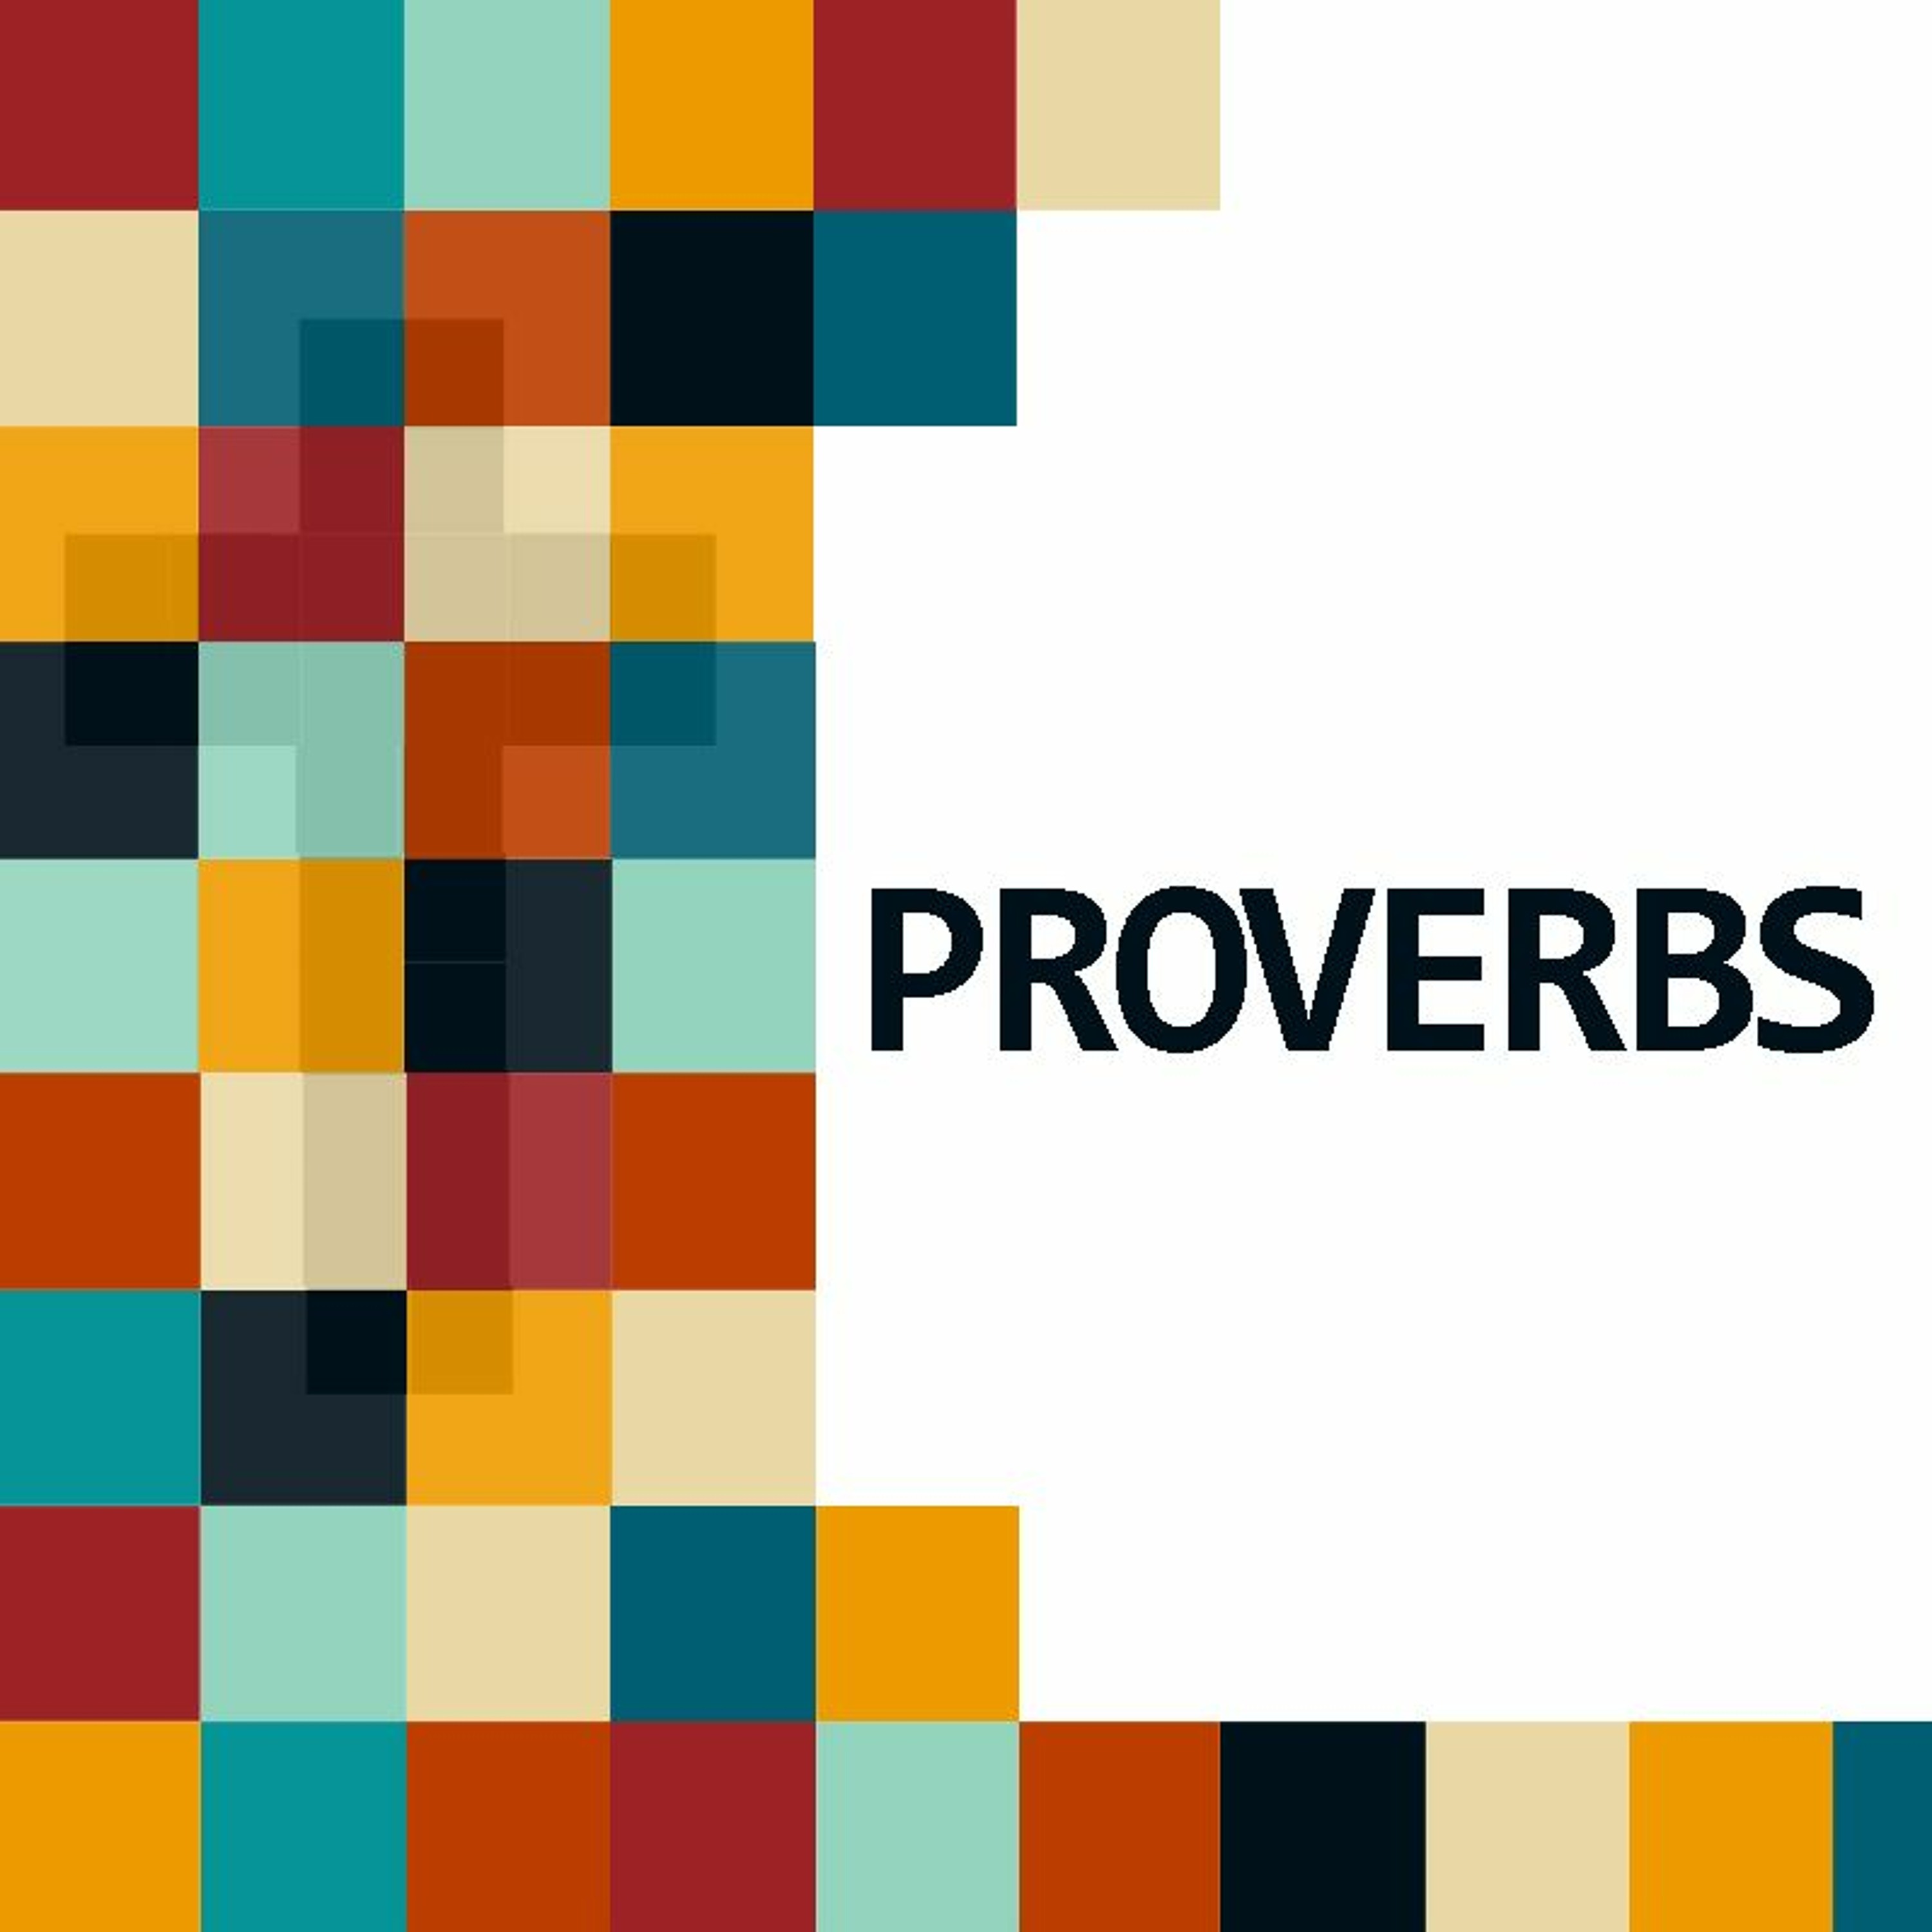 Proverbs | Fear of the Lord